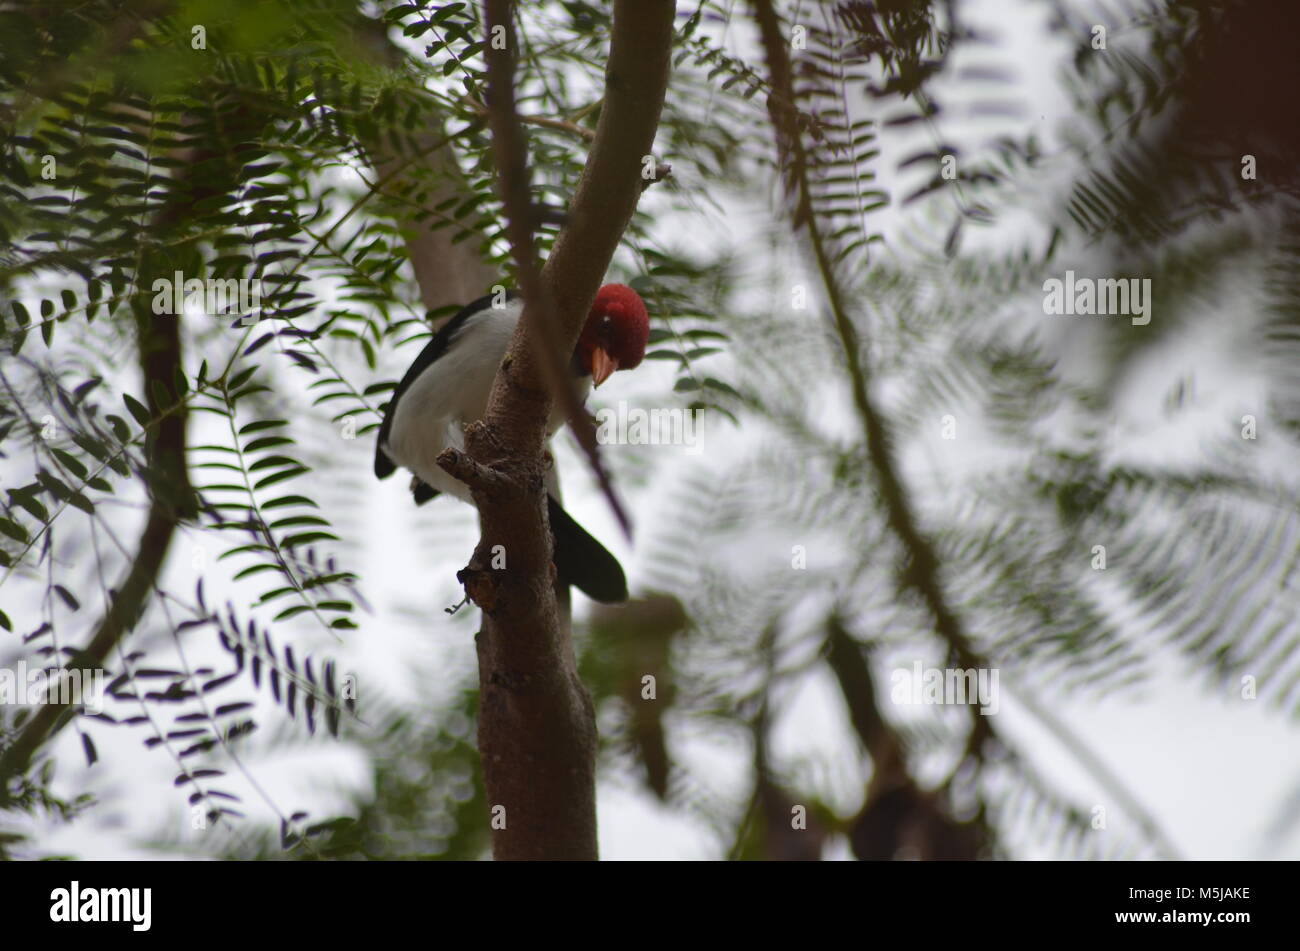 A Hawaiian Red-crested cardinal, sits perched high in the tropical trees having a look down below Stock Photo